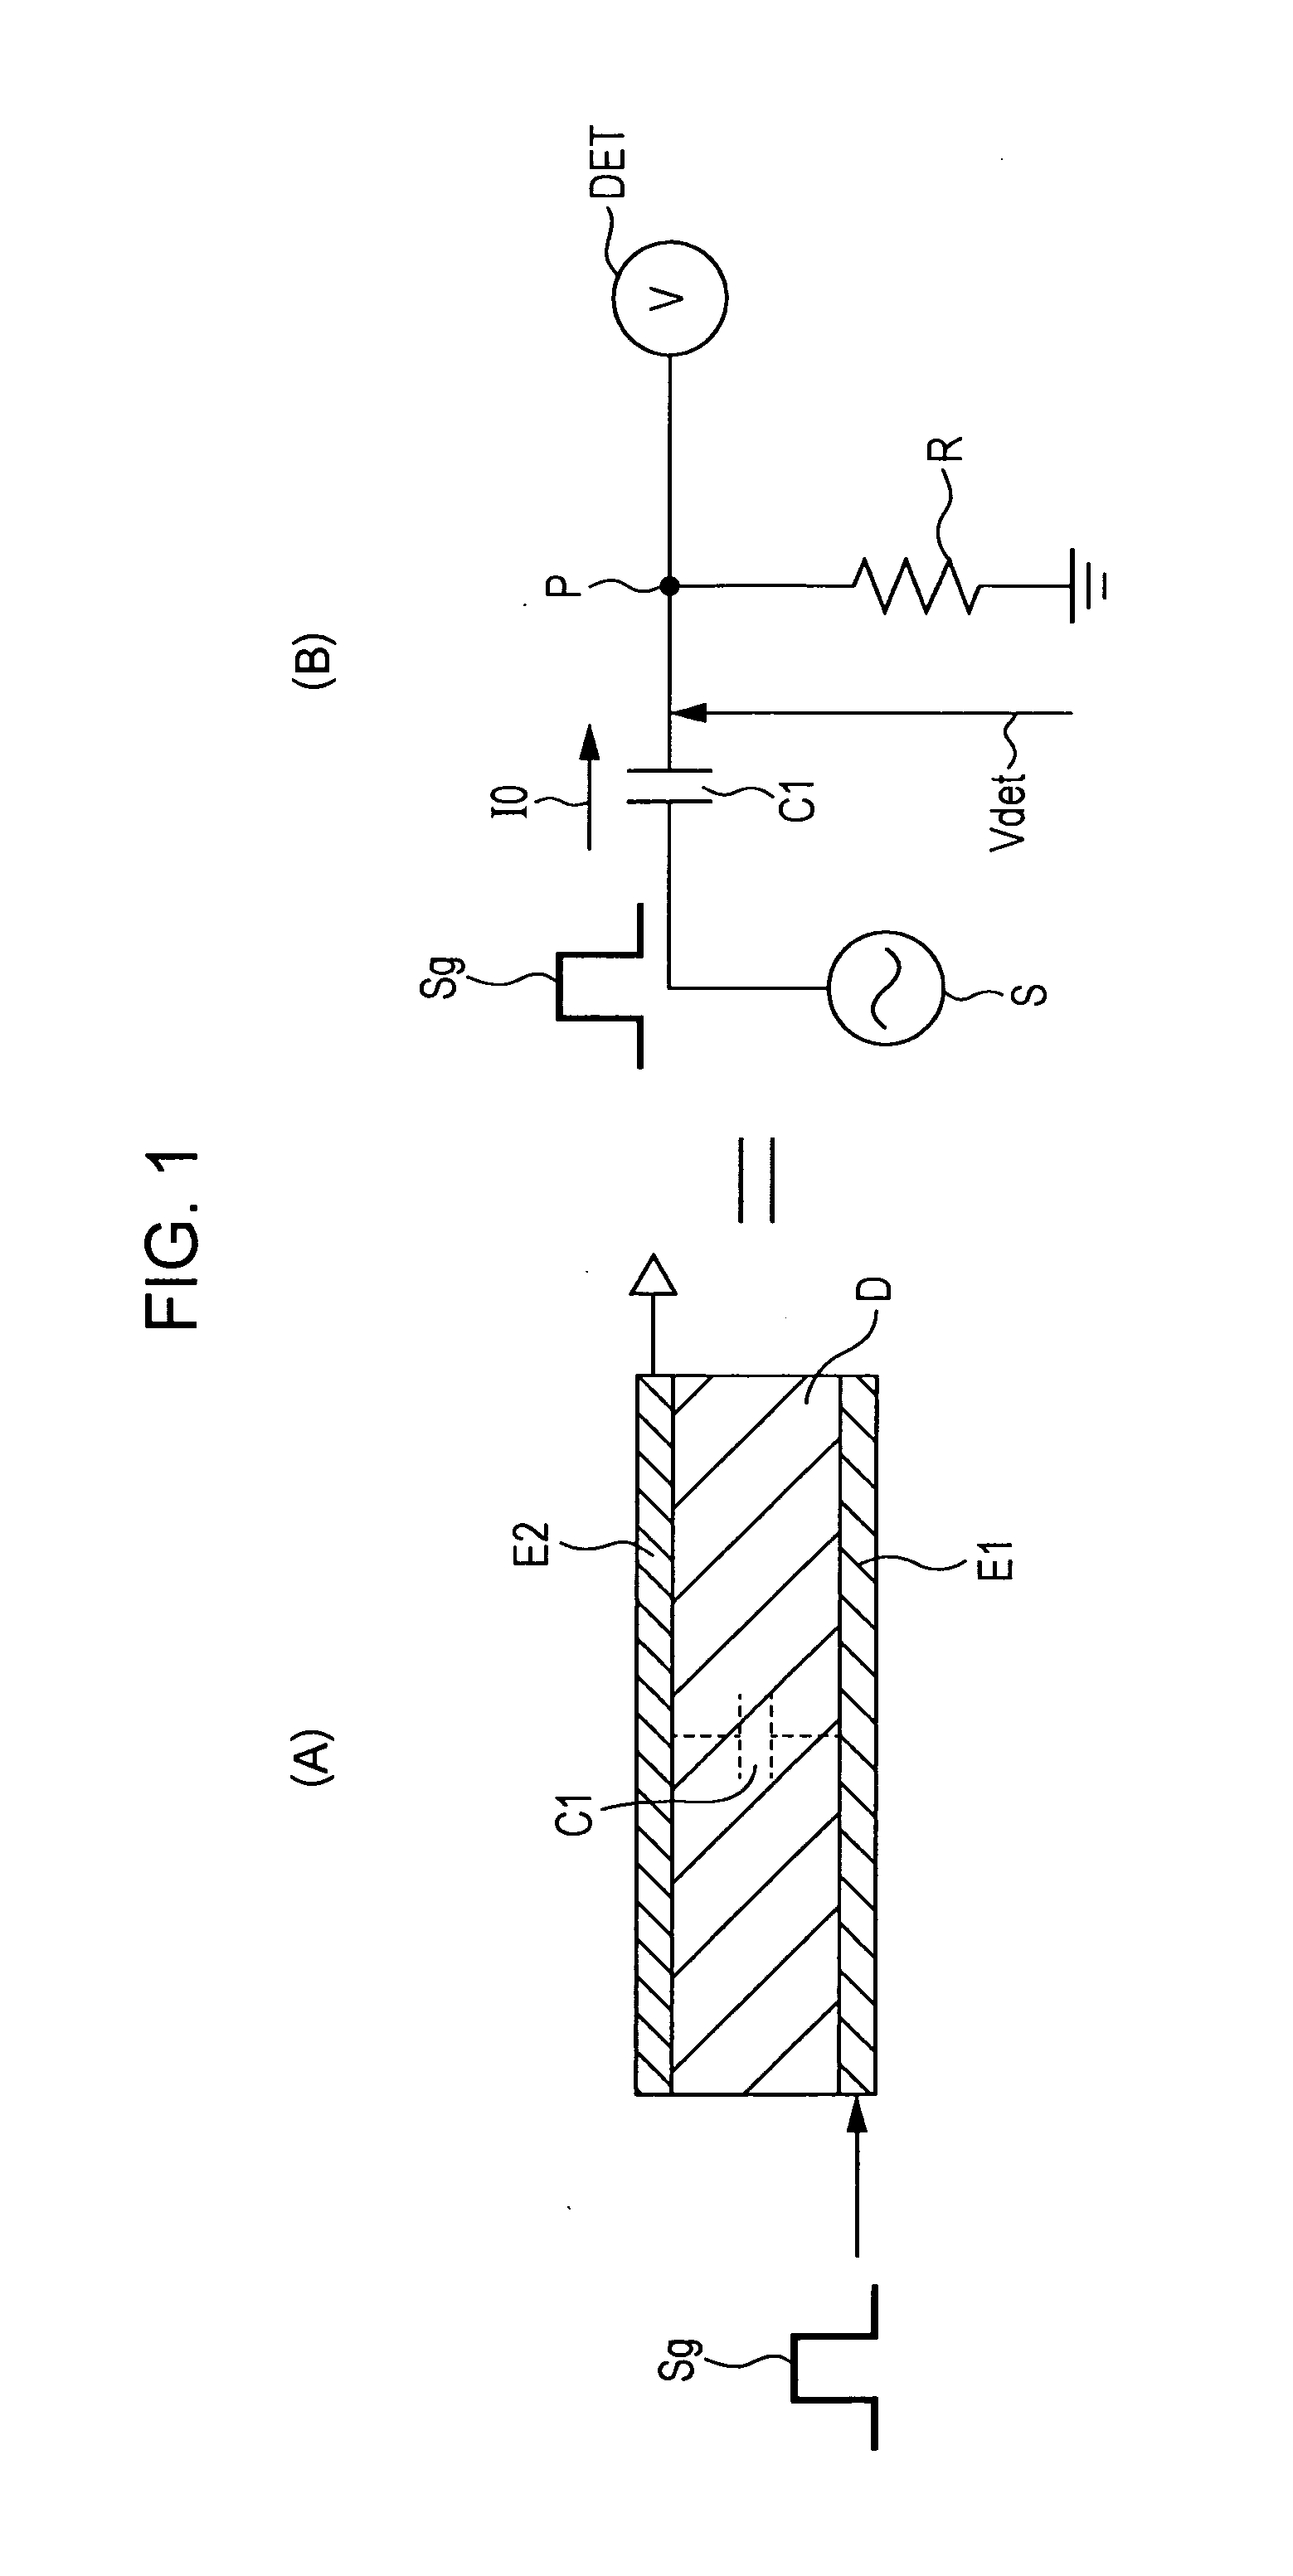 Display apparatus with touch detection function, drive circuit, method of driving display apparatus with touch detection function, and electronic devices